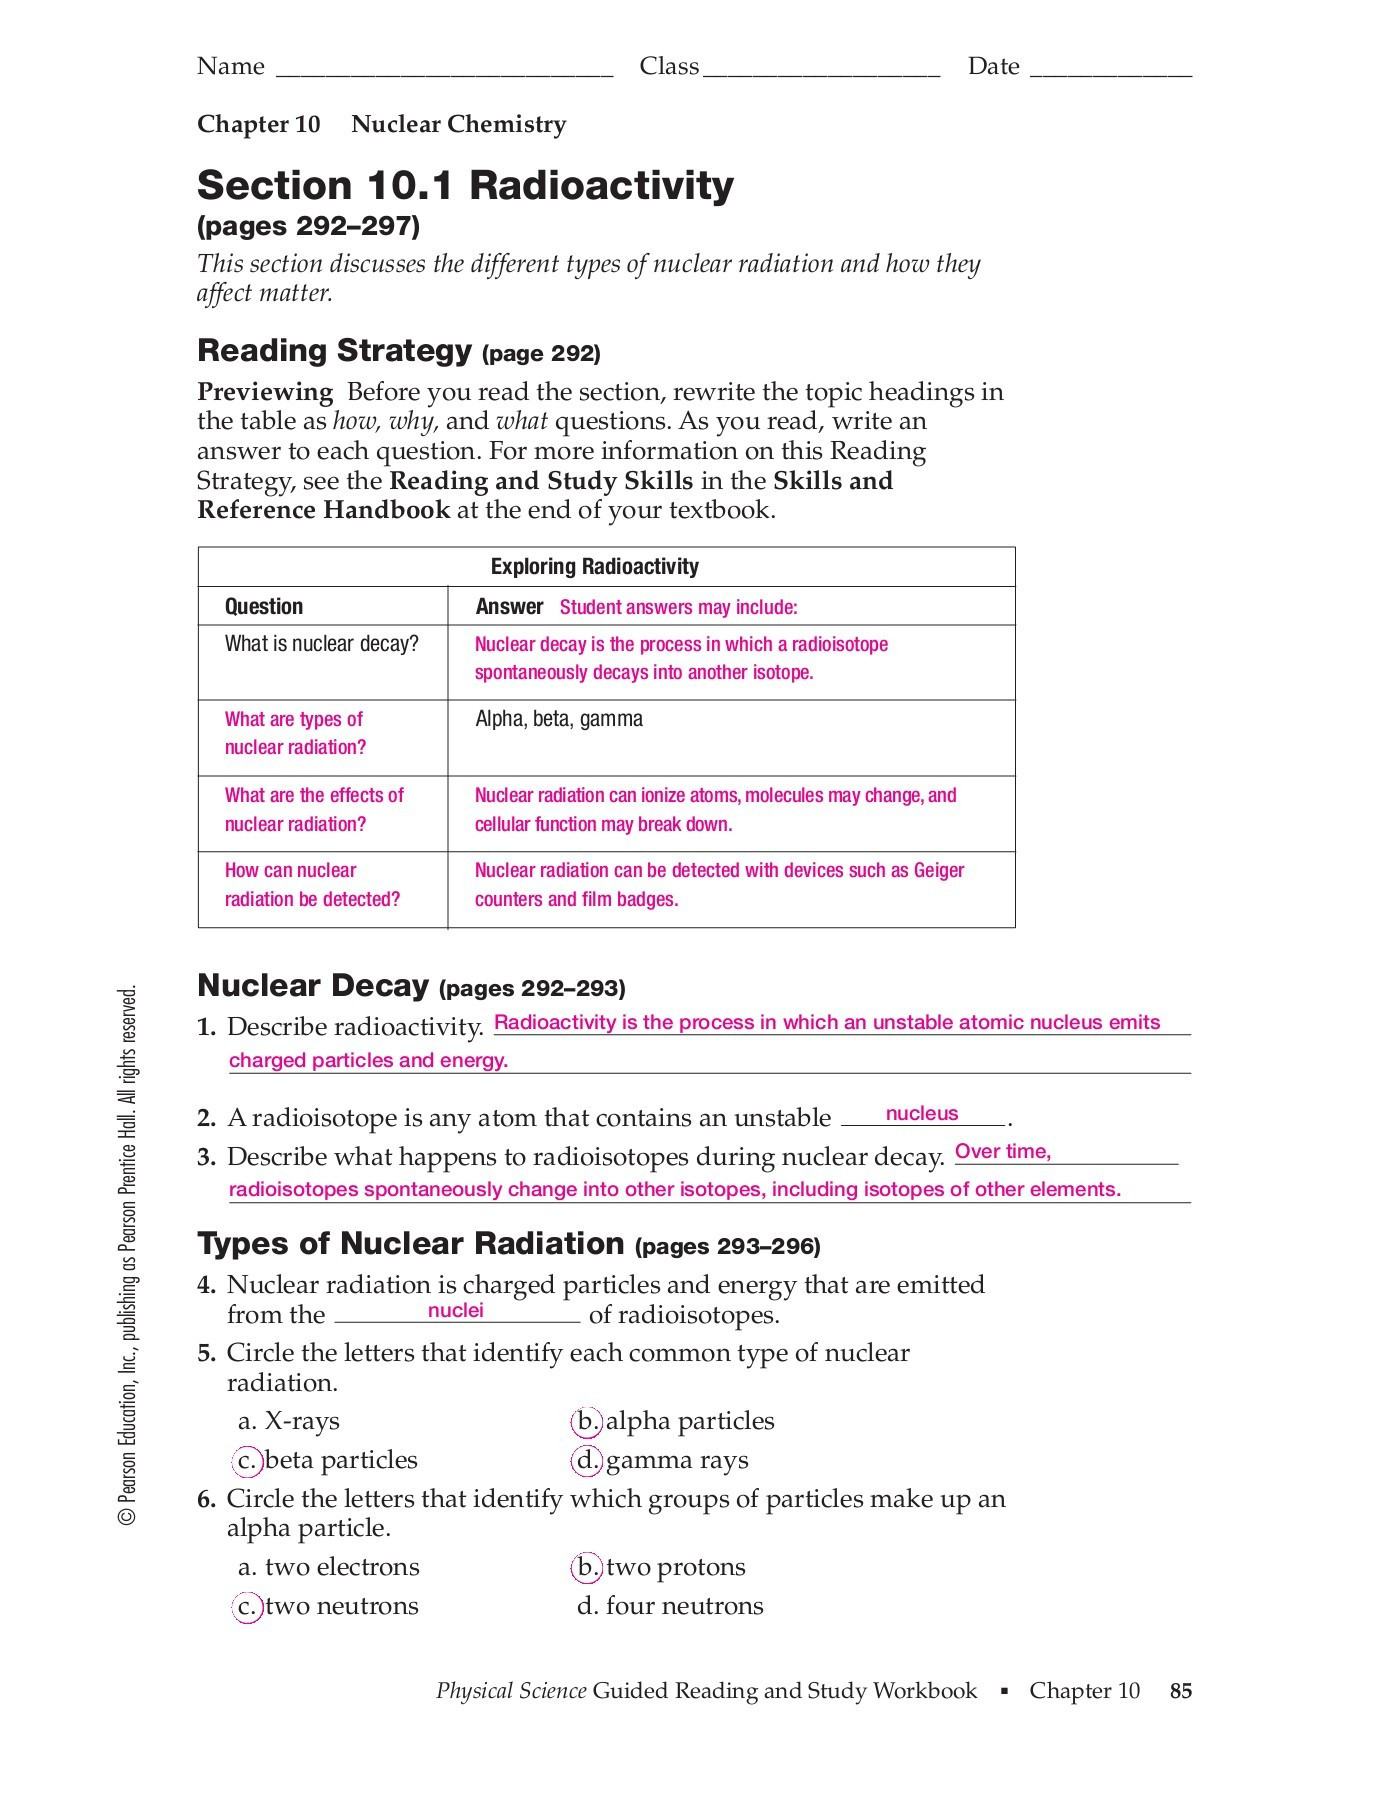 Nuclear Decay Worksheet Answers Key Chapter 10 Nuclear Chemistry Section 10 1 Radioactivity